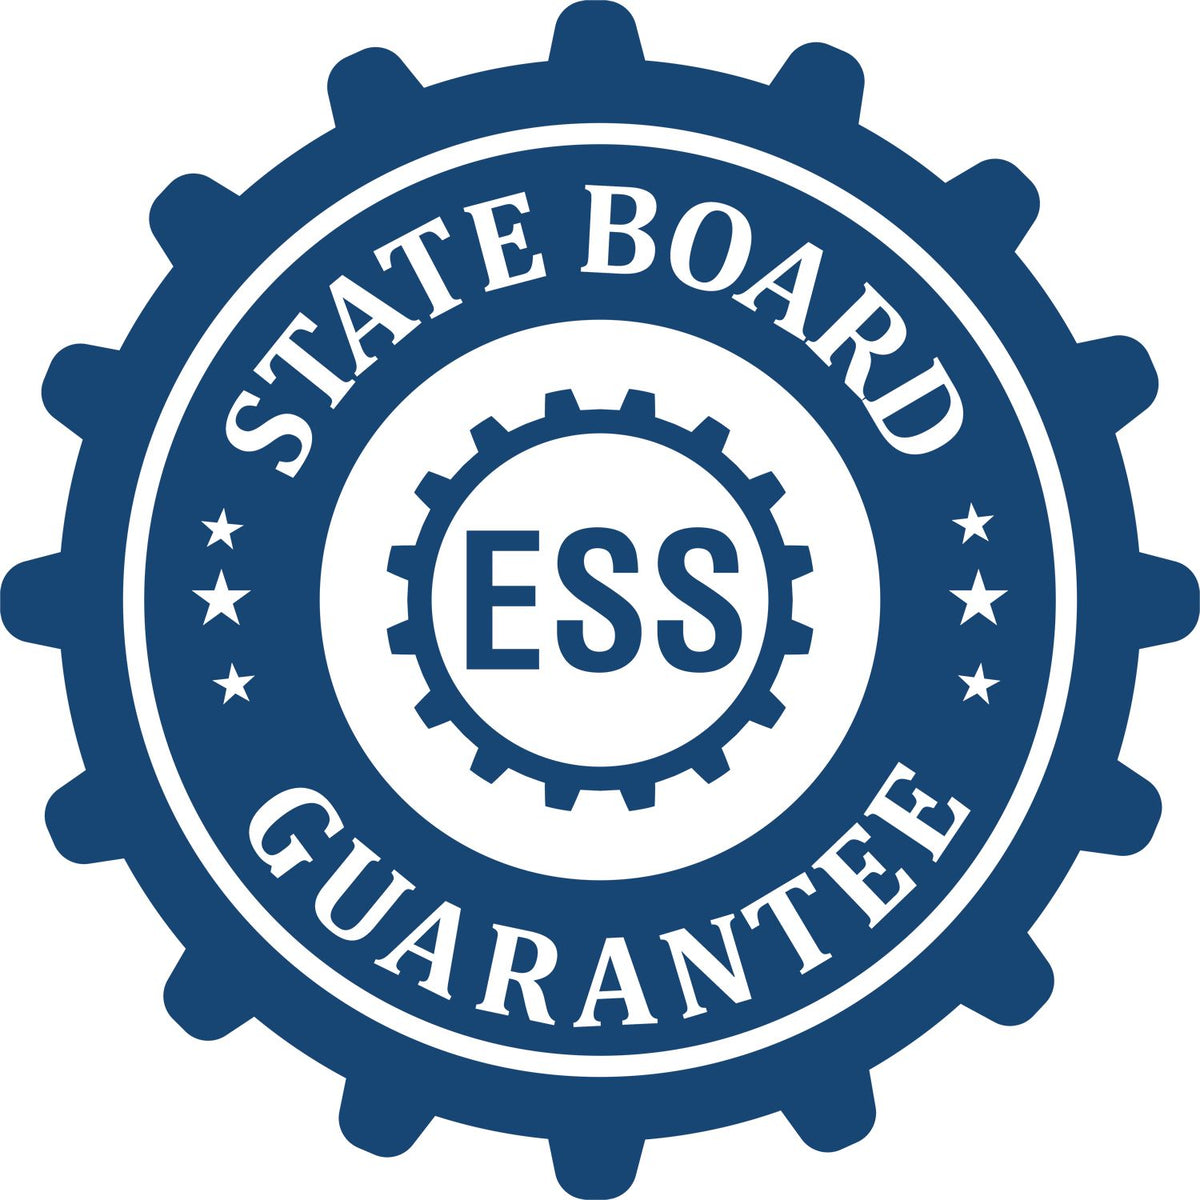 An emblem in a gear shape illustrating a state board guarantee for the Hybrid Rhode Island Architect Seal